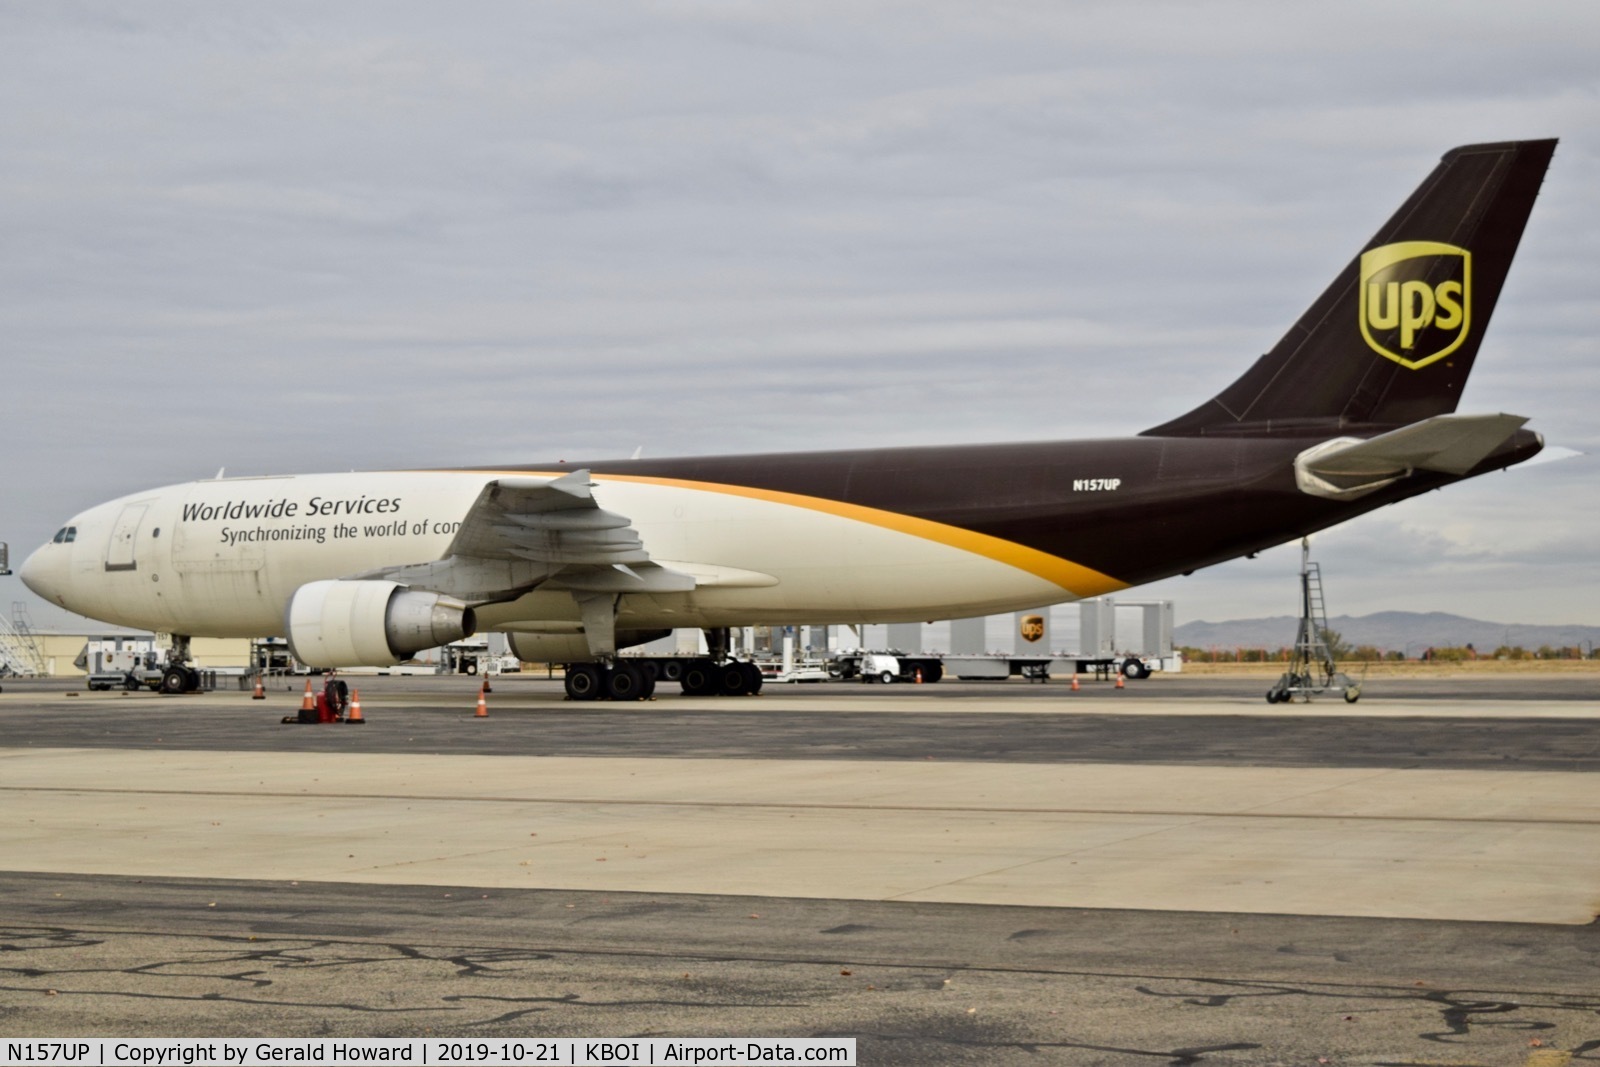 N157UP, 2004 Airbus A300F4-622R C/N 0846, Parked on the UPS ramp.